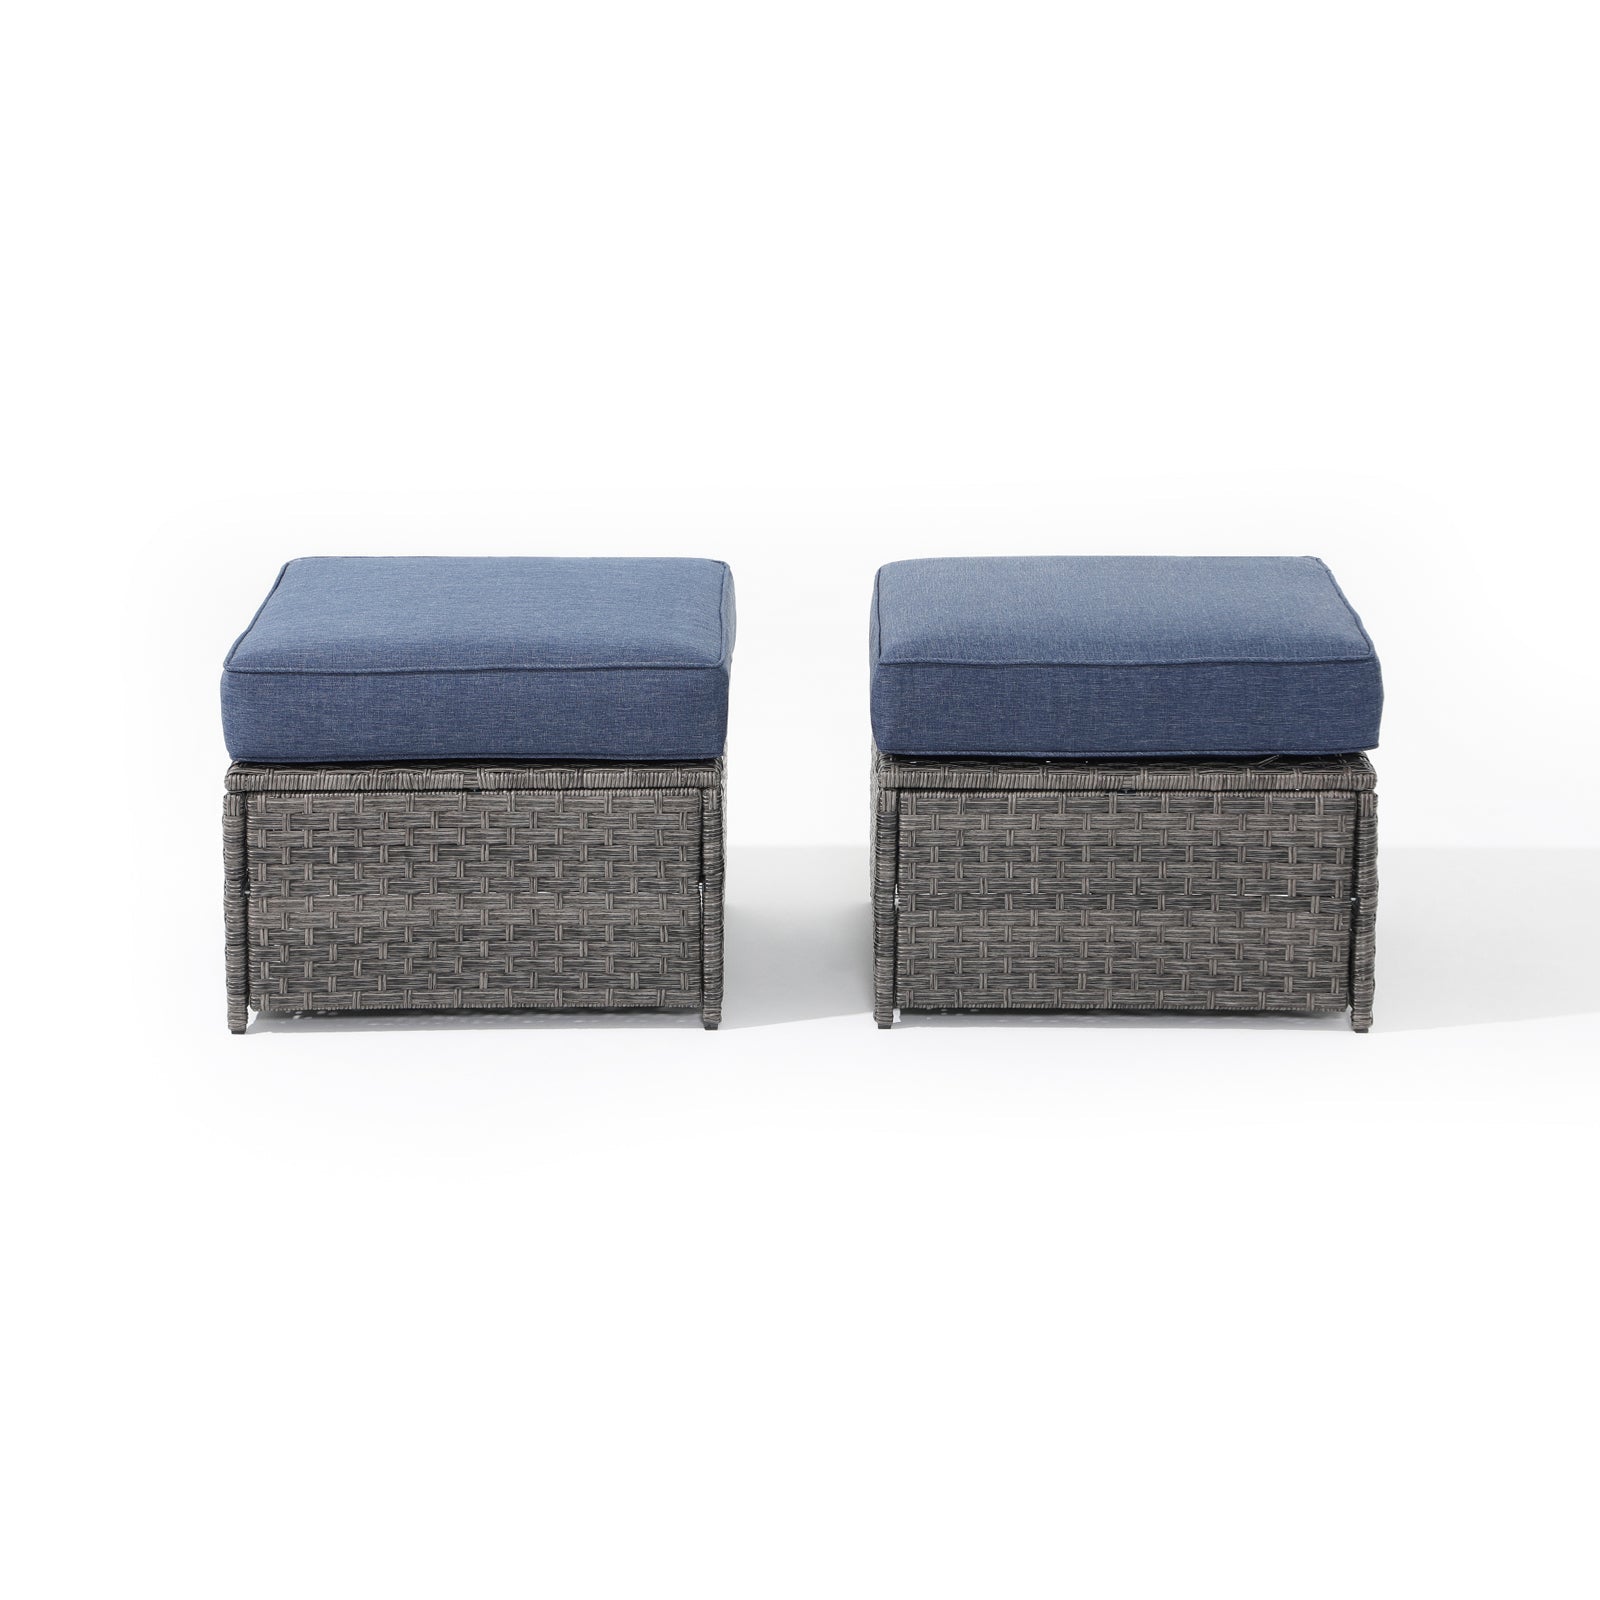 Ayia Modern HDPE Wicker Outdoor Furniture, 2-Piece grey wicker Ottomans and blue cushions, front - Jardina Furniture #color_Navy blue